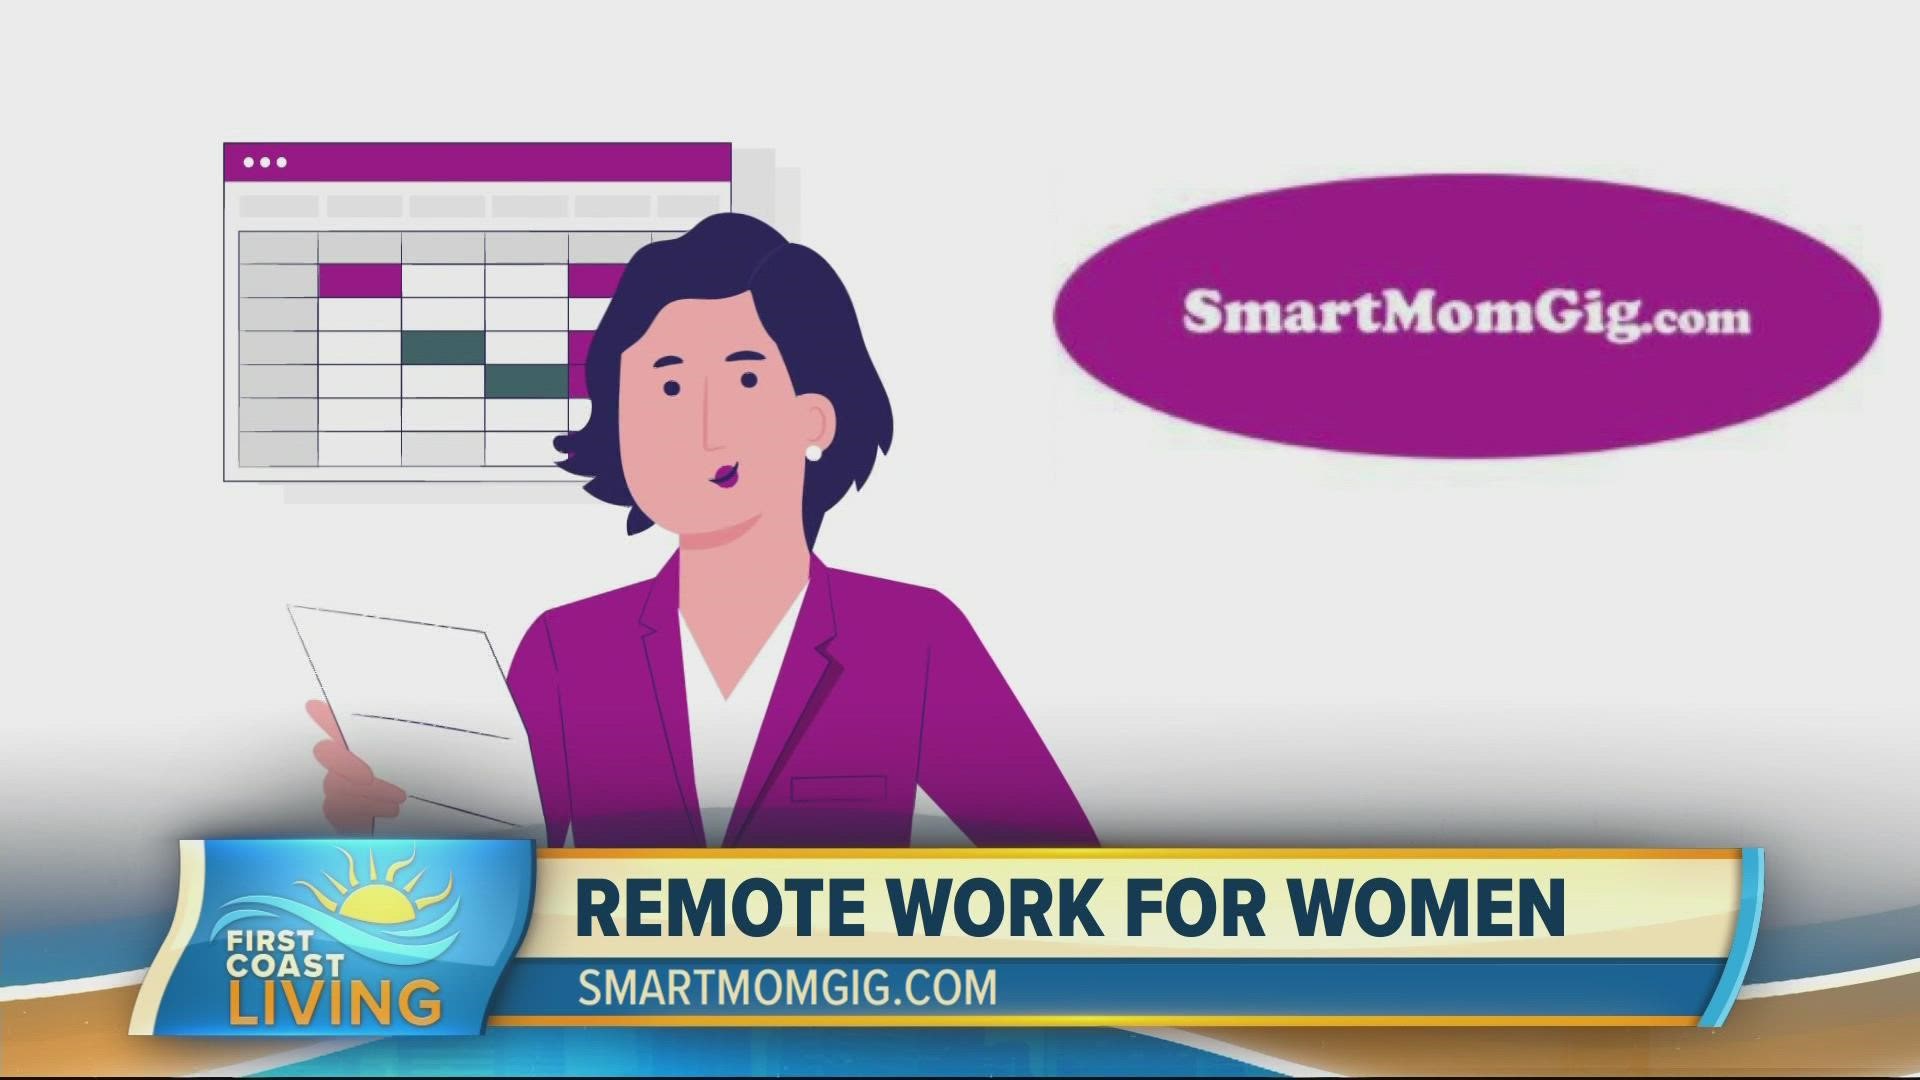 SmartMomGig.com is a platform that matches mothers and women with professional "gig" work opportunities.